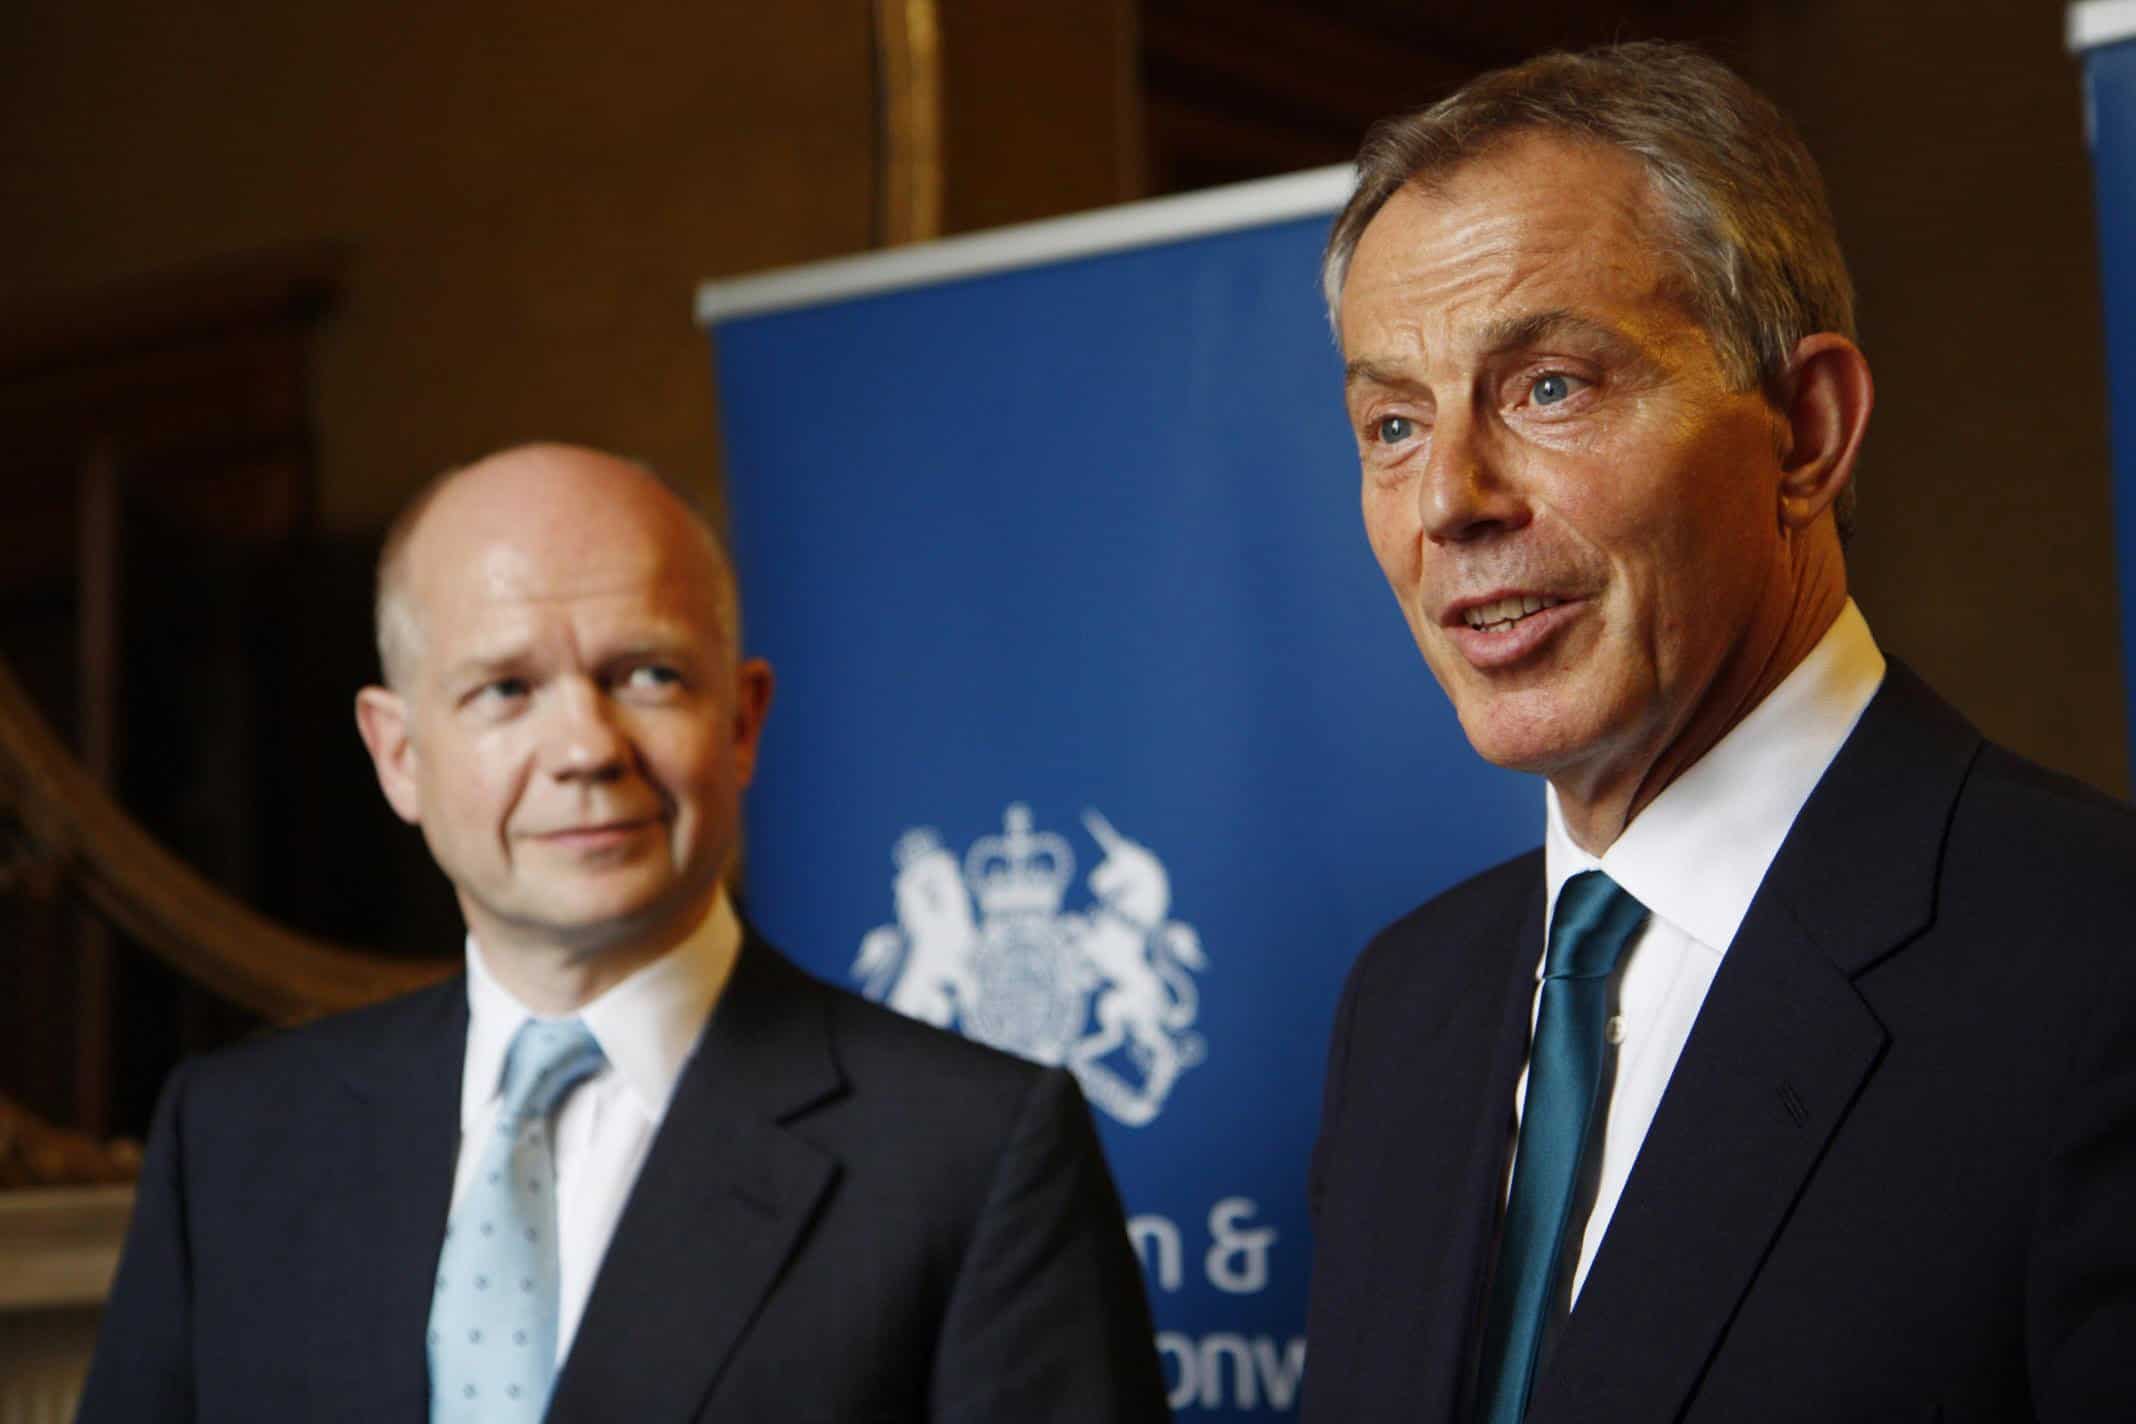 Tony Blair and Lord Hague call for NHS medical records to be sold